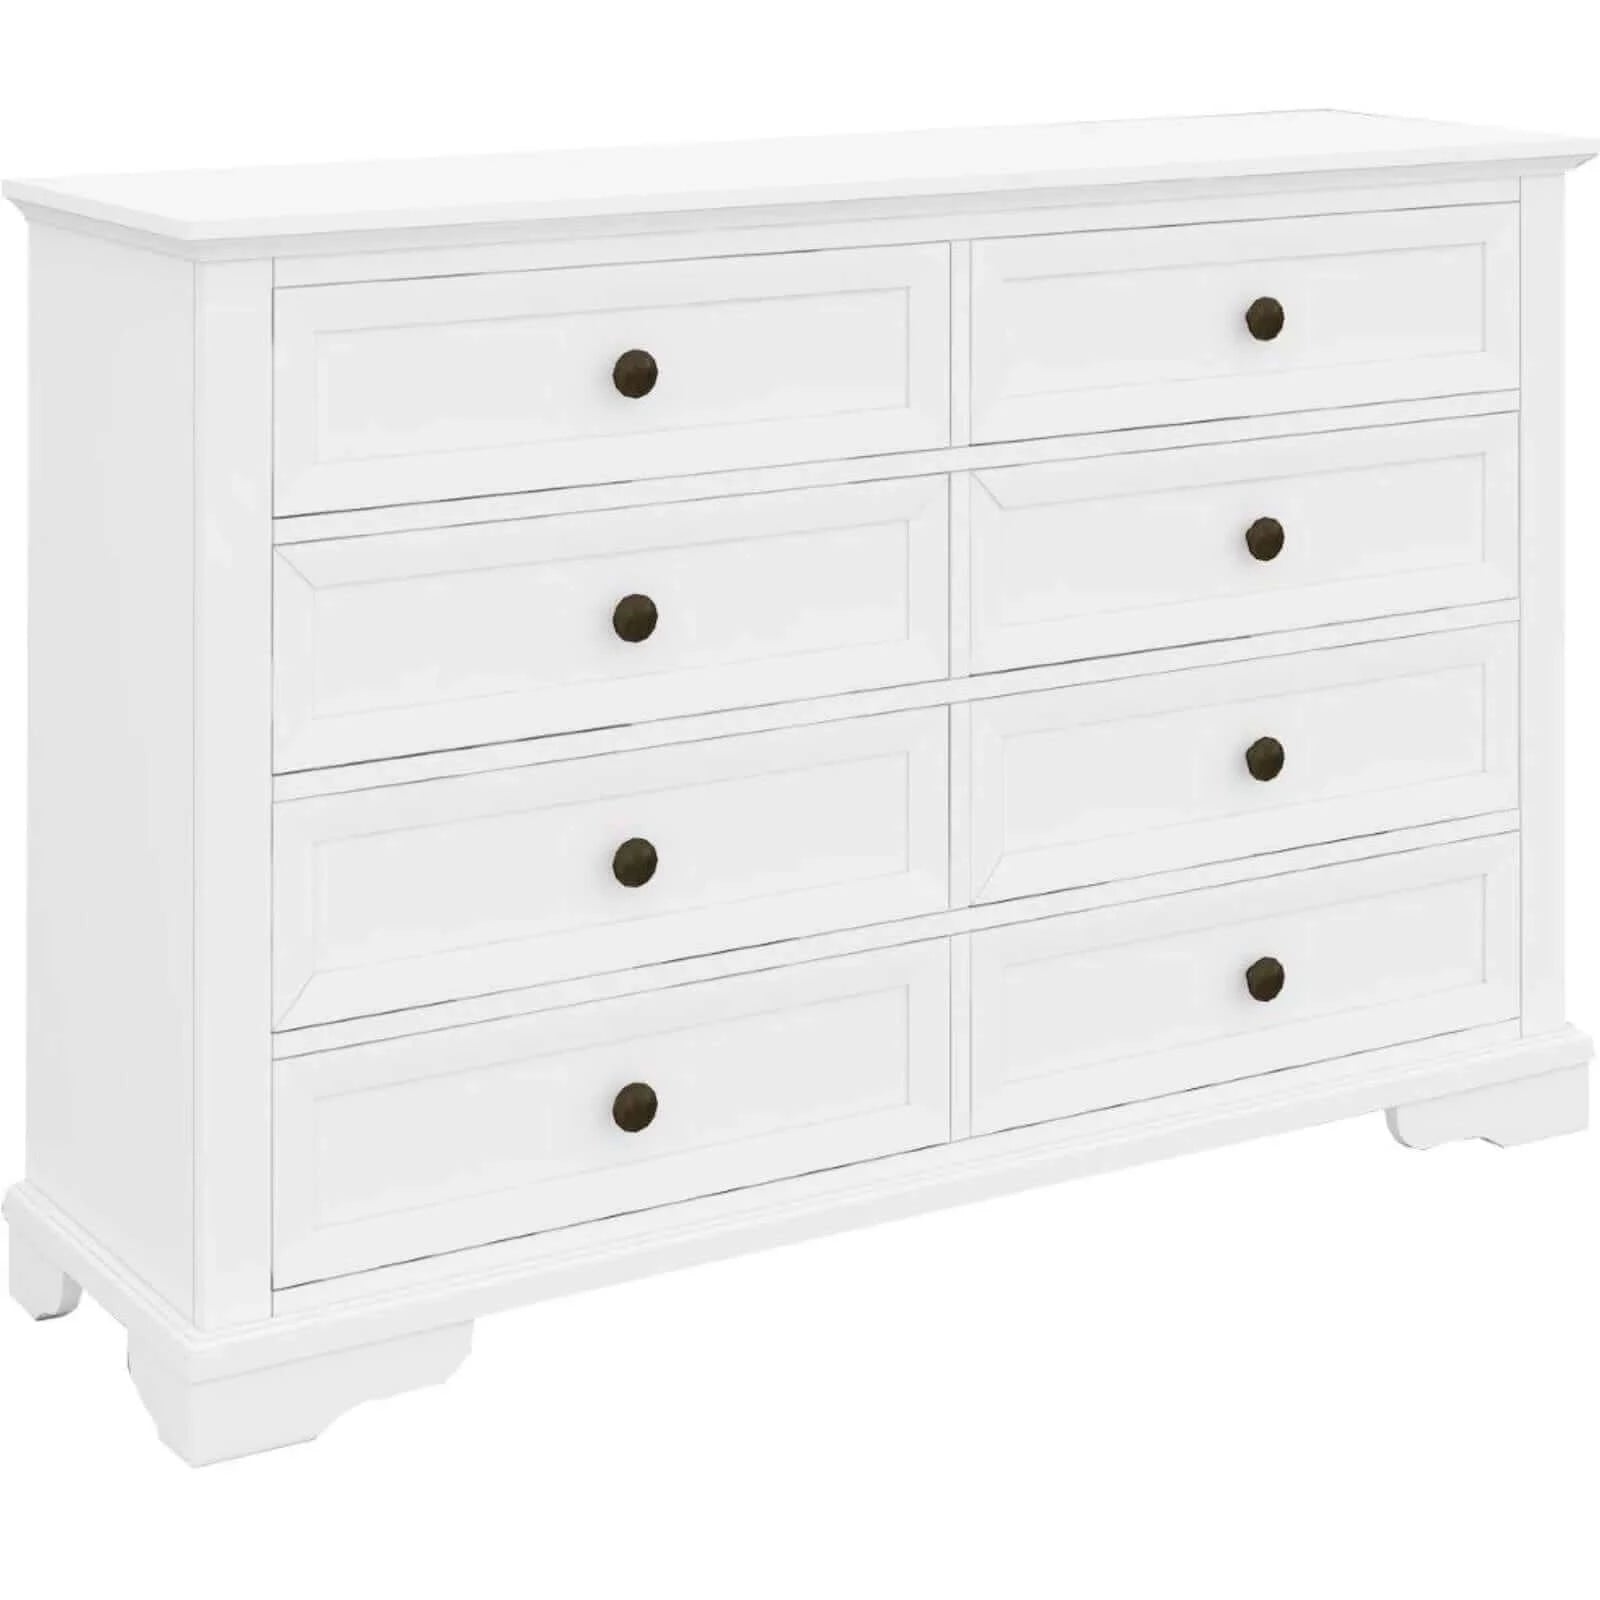 Buy celosia dresser 8 chest of drawers bedroom acacia timber storage cabinet - white - upinteriors-Upinteriors